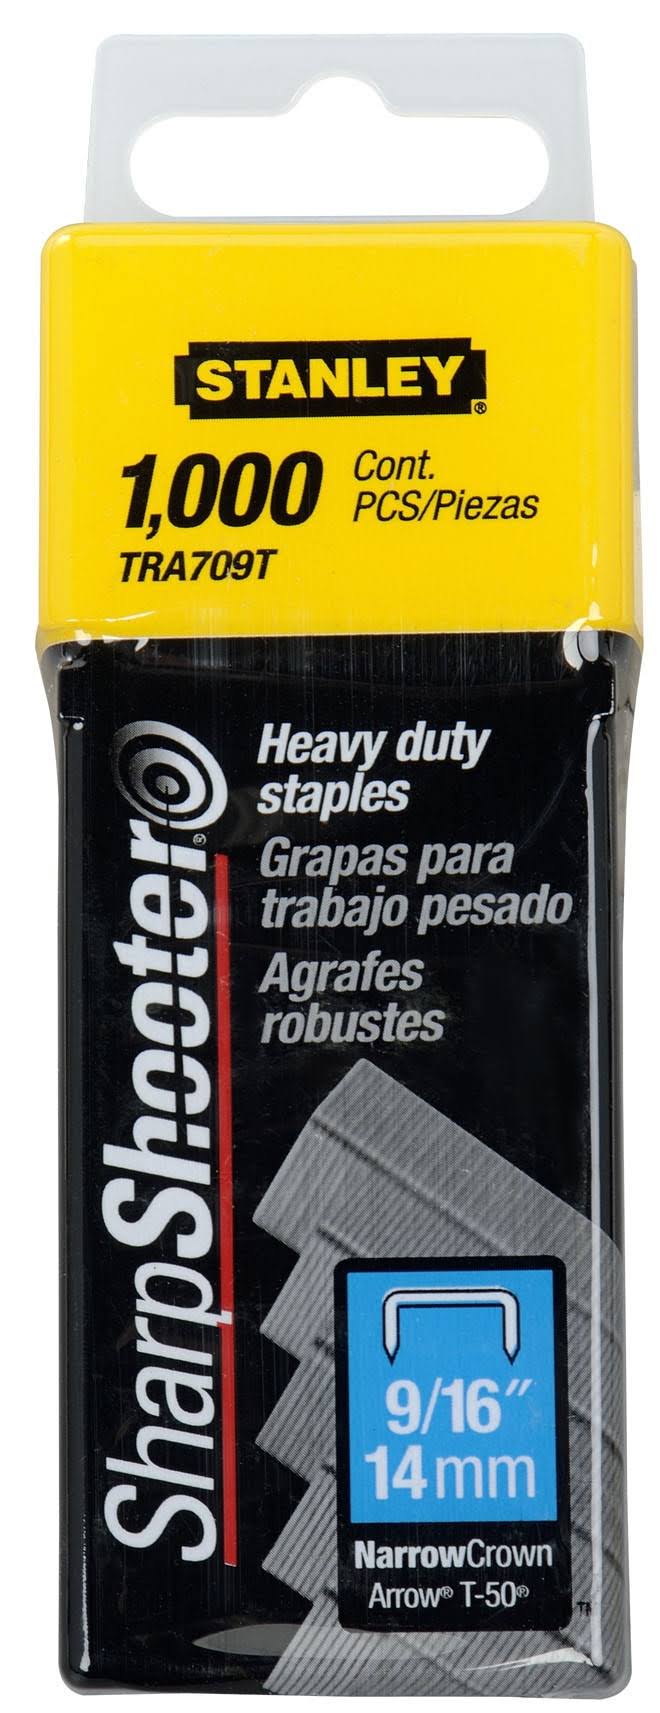 Stanley Sharpshooter Heavy Duty Staples - 9/16", 1000 Count